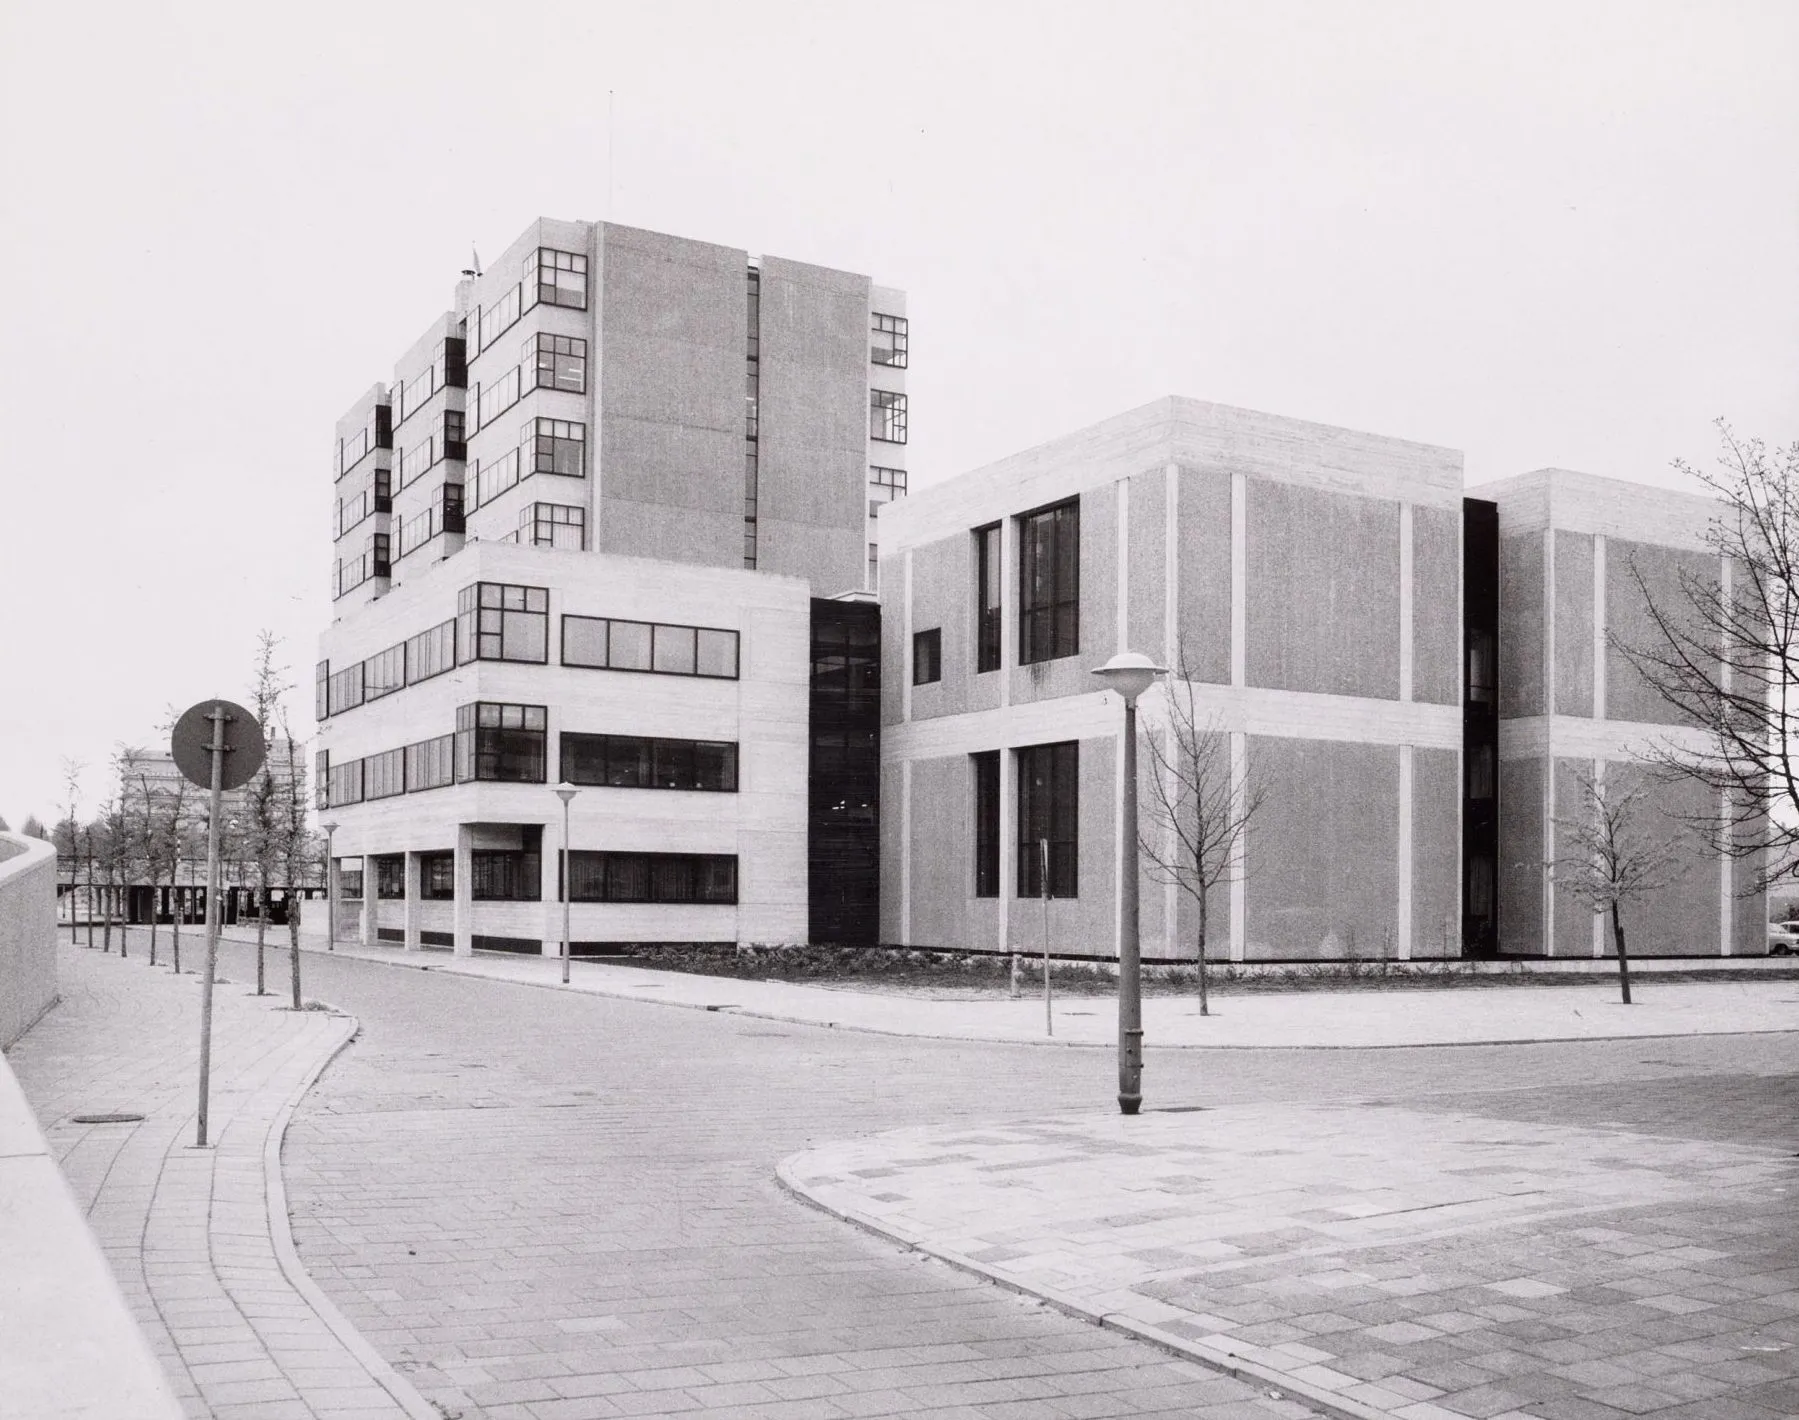 black & white photograph of the building Parnassuweg 220 with a few newly planted trees